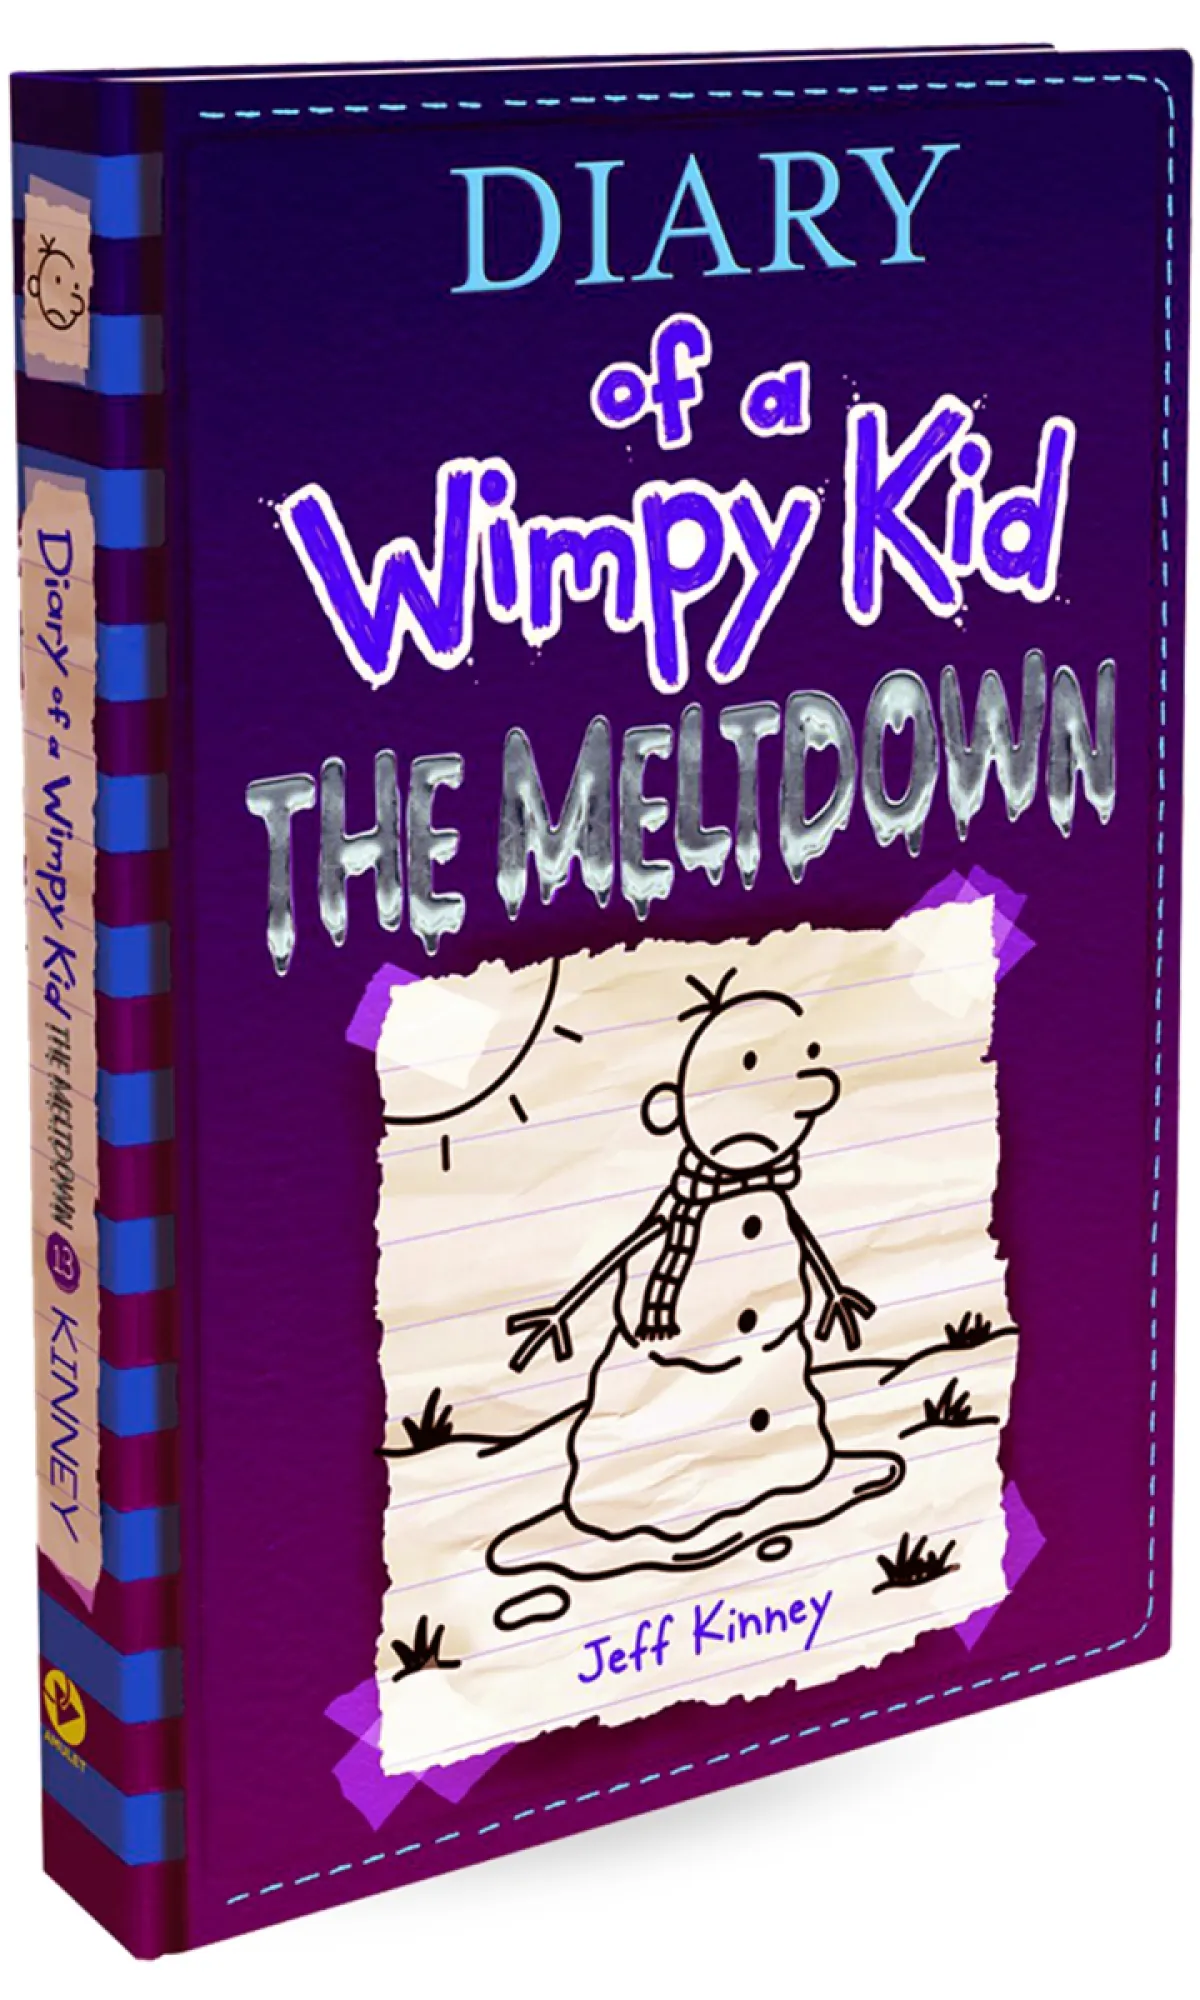 purple book with cartoon kid/snowman. Diary of a Wimpy Kid The Meltdown